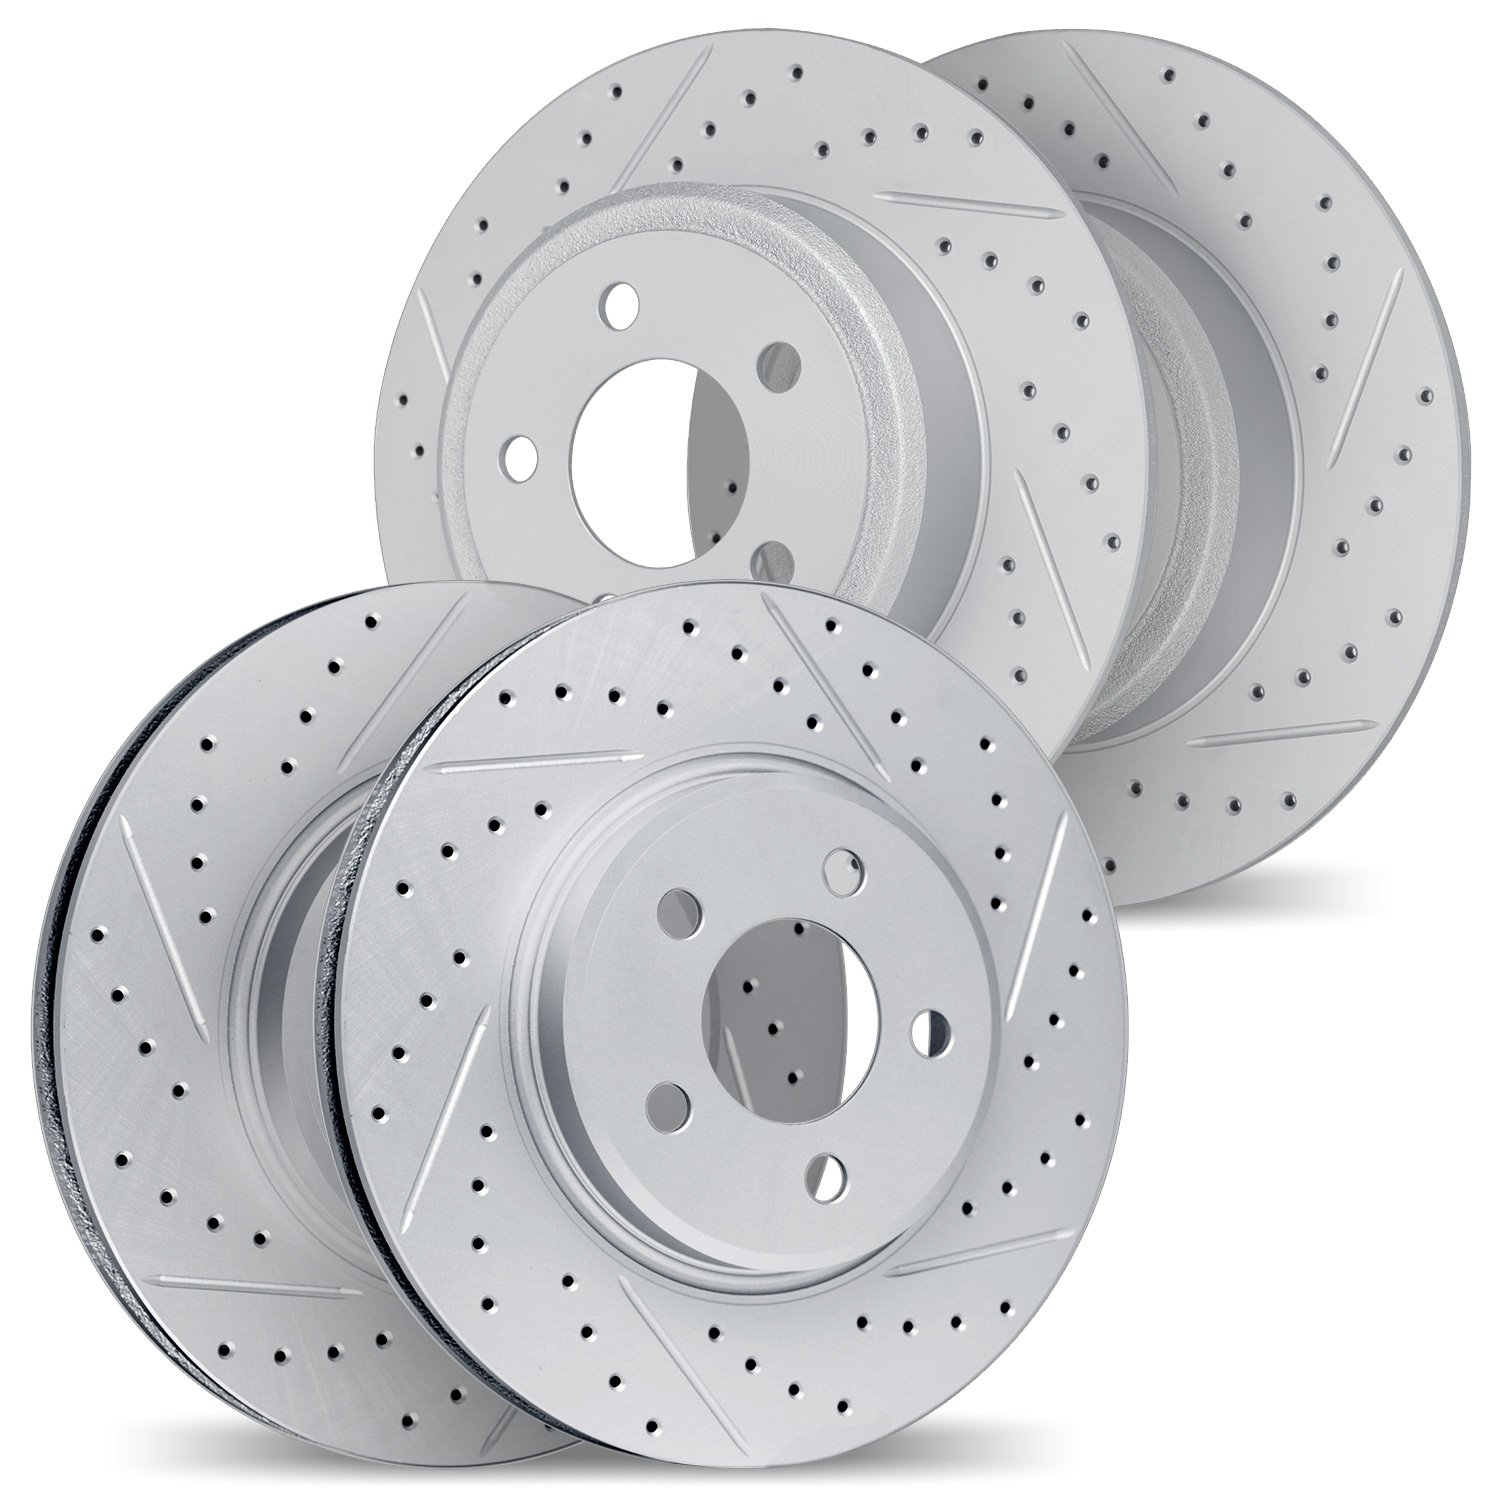 2004-76002 Geoperformance Drilled/Slotted Brake Rotors, 1992-1996 Lexus/Toyota/Scion, Position: Front and Rear